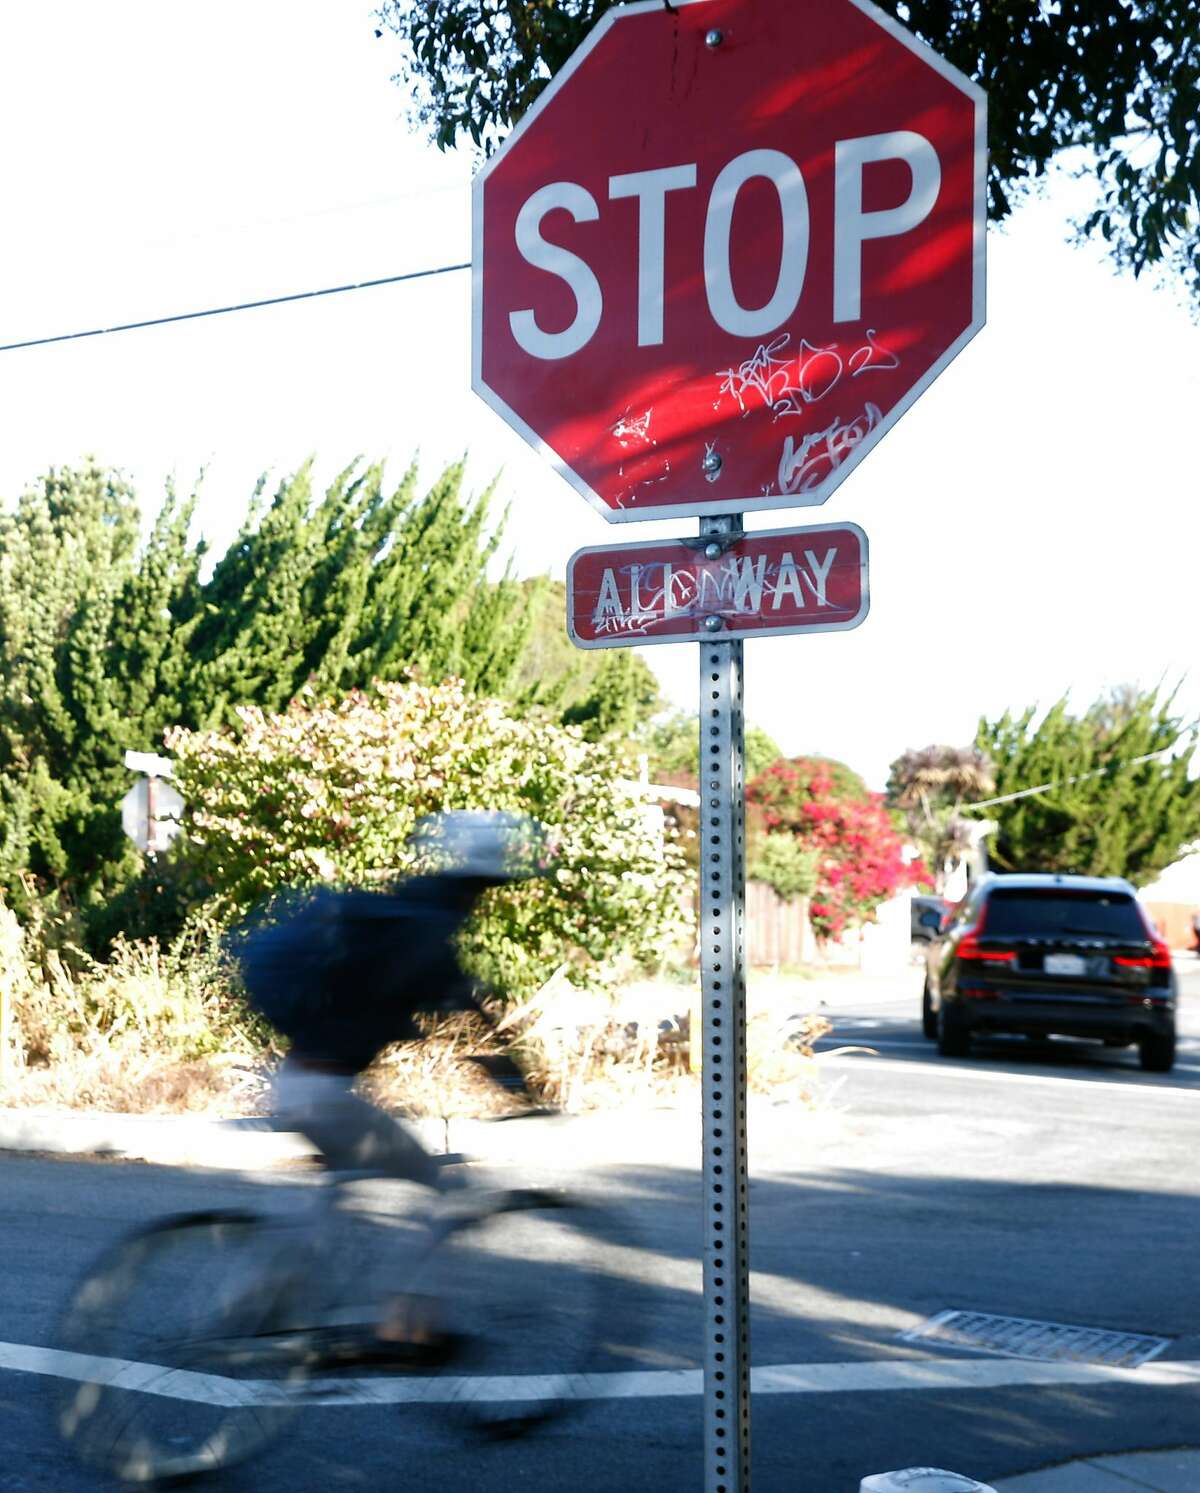 A blcyclist rolls through a stop sign at Bancroft Way and California Street in Berkeley, Calif. on Wednesday, Sept. 11, 2019. Berkeley Police are issuing $300 citations to bicyclists who blow through stop signs or red lights.